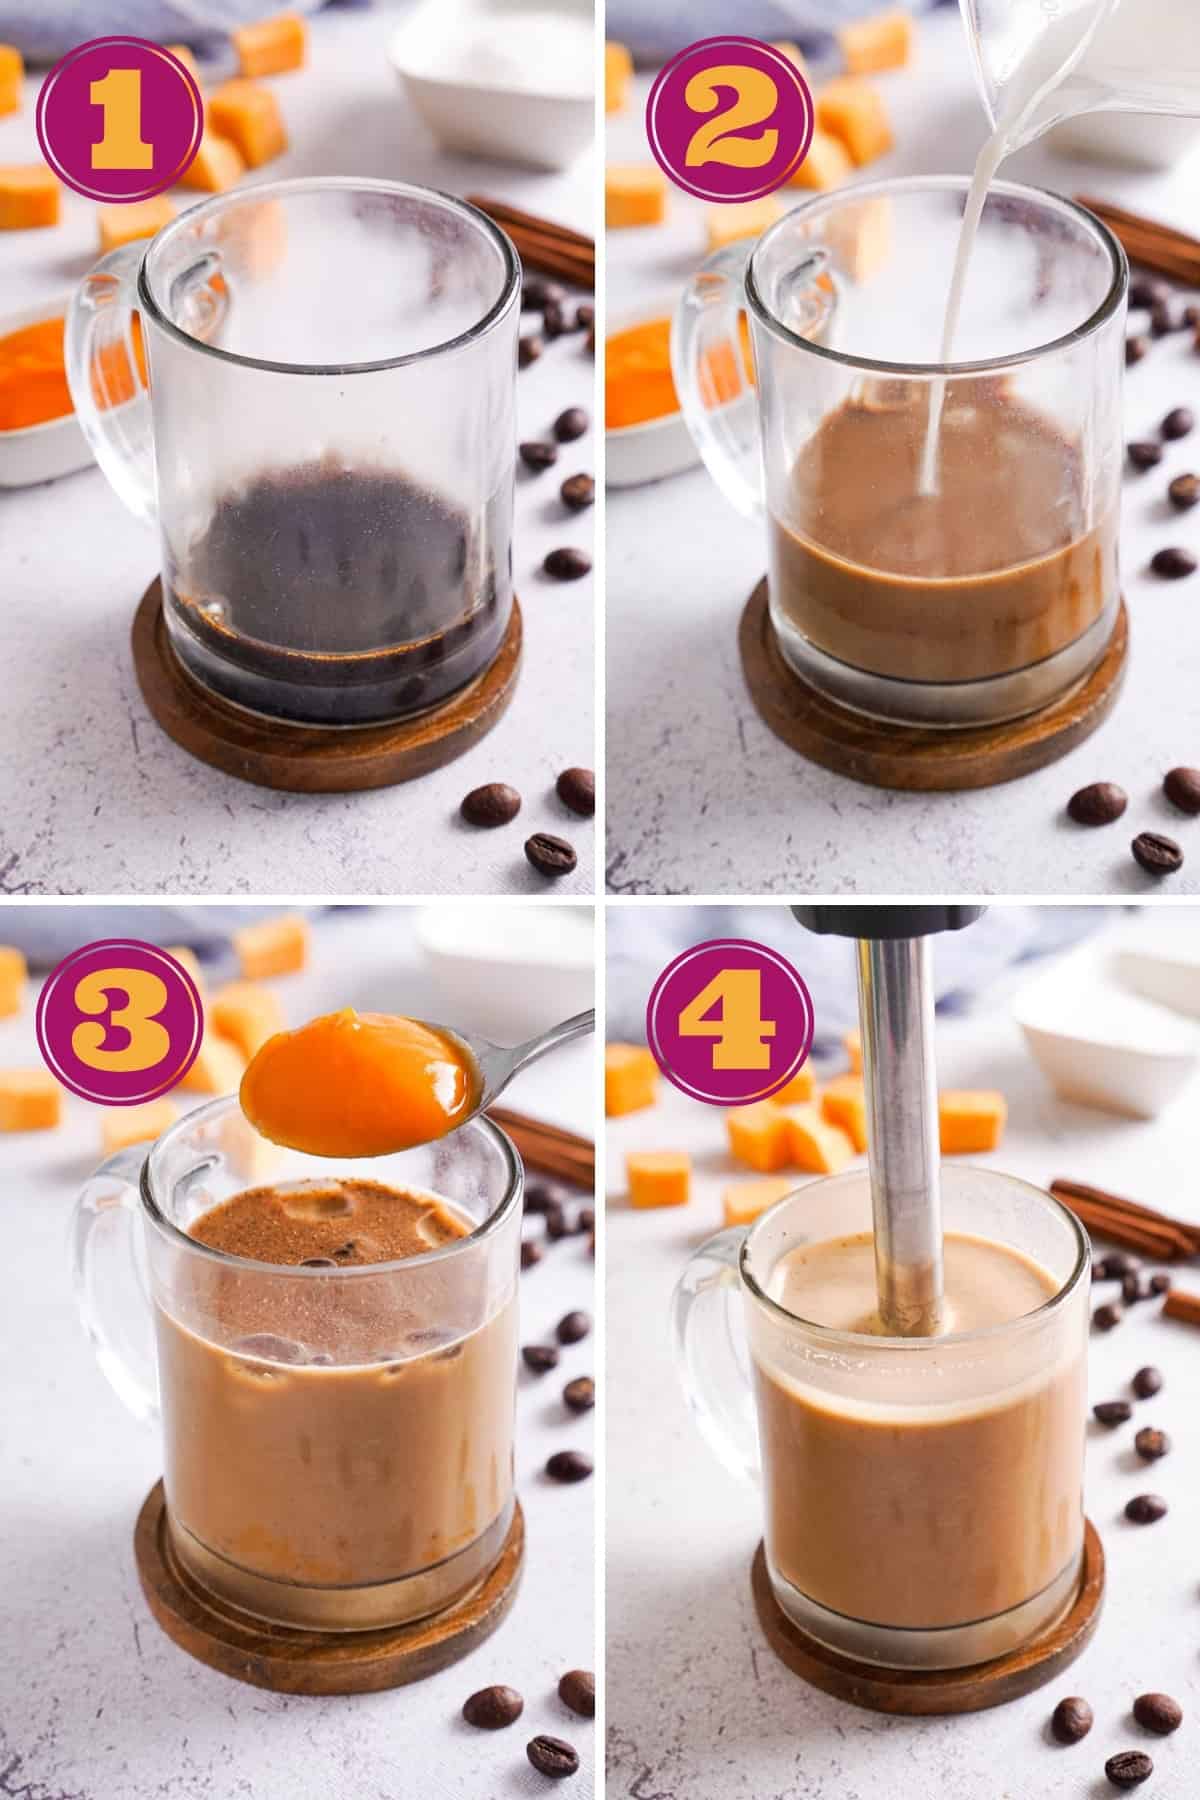 step-by-step instructions for hoe to make Keto Pumpkin Spice Latte with Pumpkin Puree and coffee